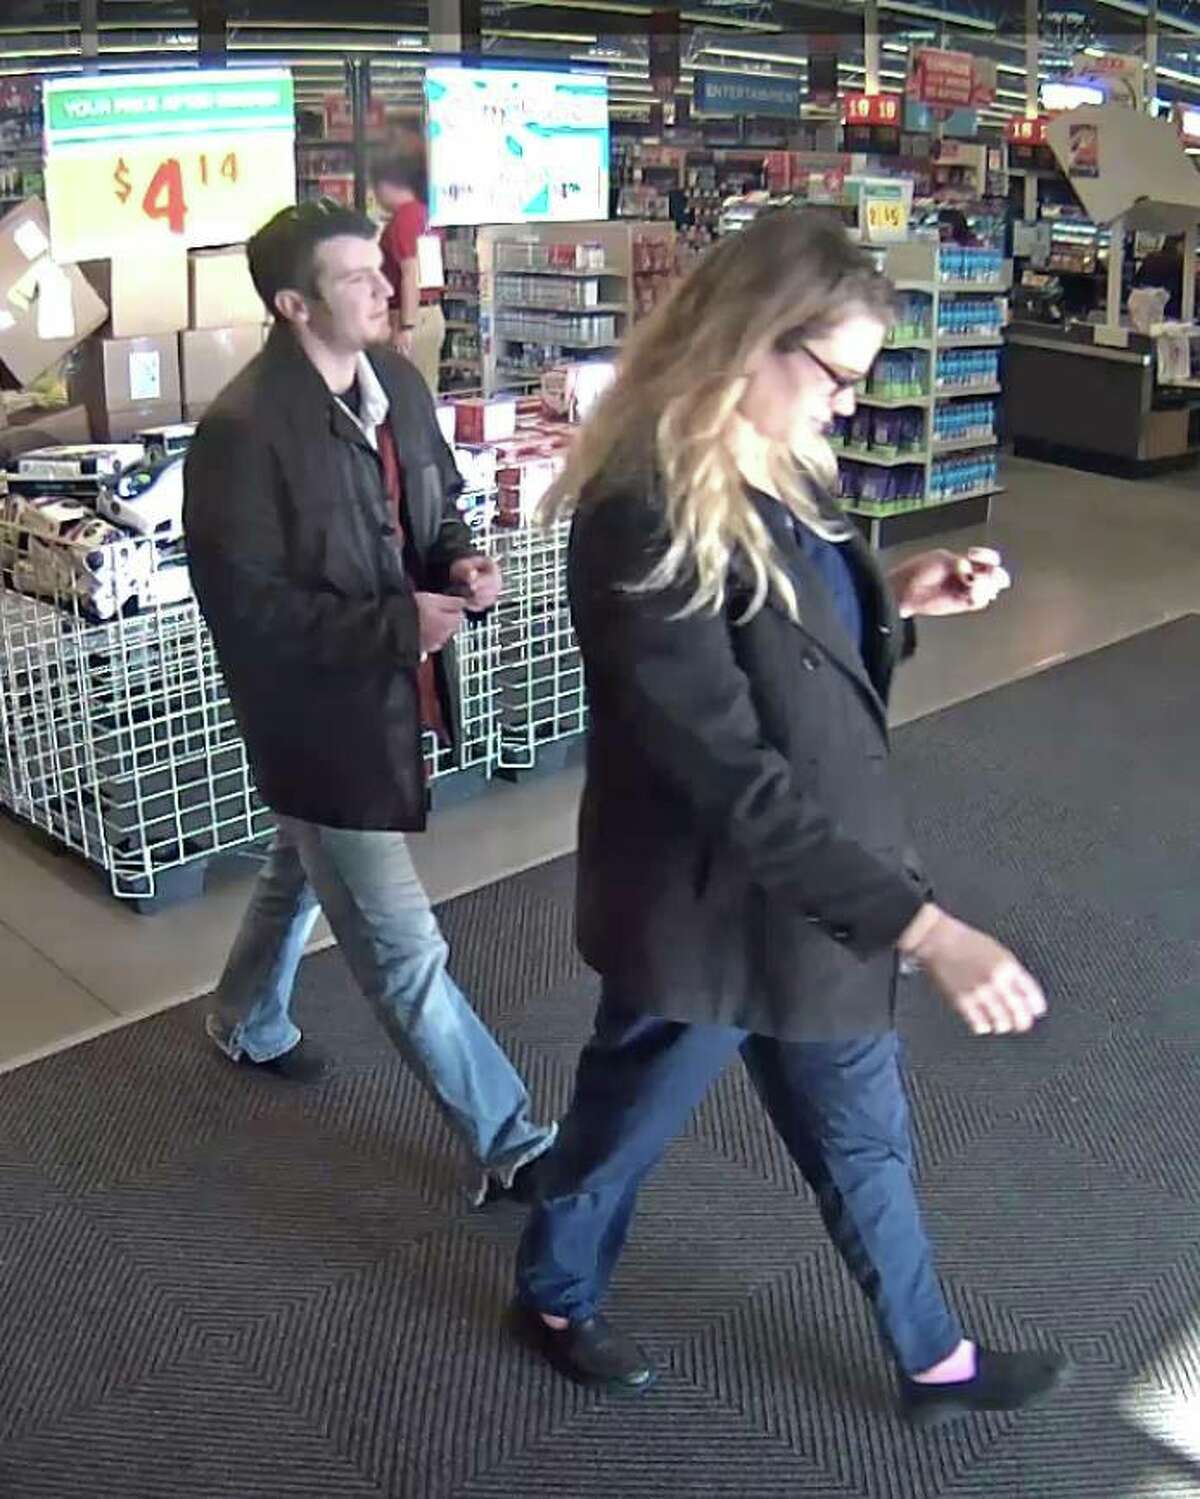 News Braunfels police are searching for two suspects who allegedly stole an estimated $1,000 worth of DVDs from a local H-E-B Plus! from Jan. 19-21.